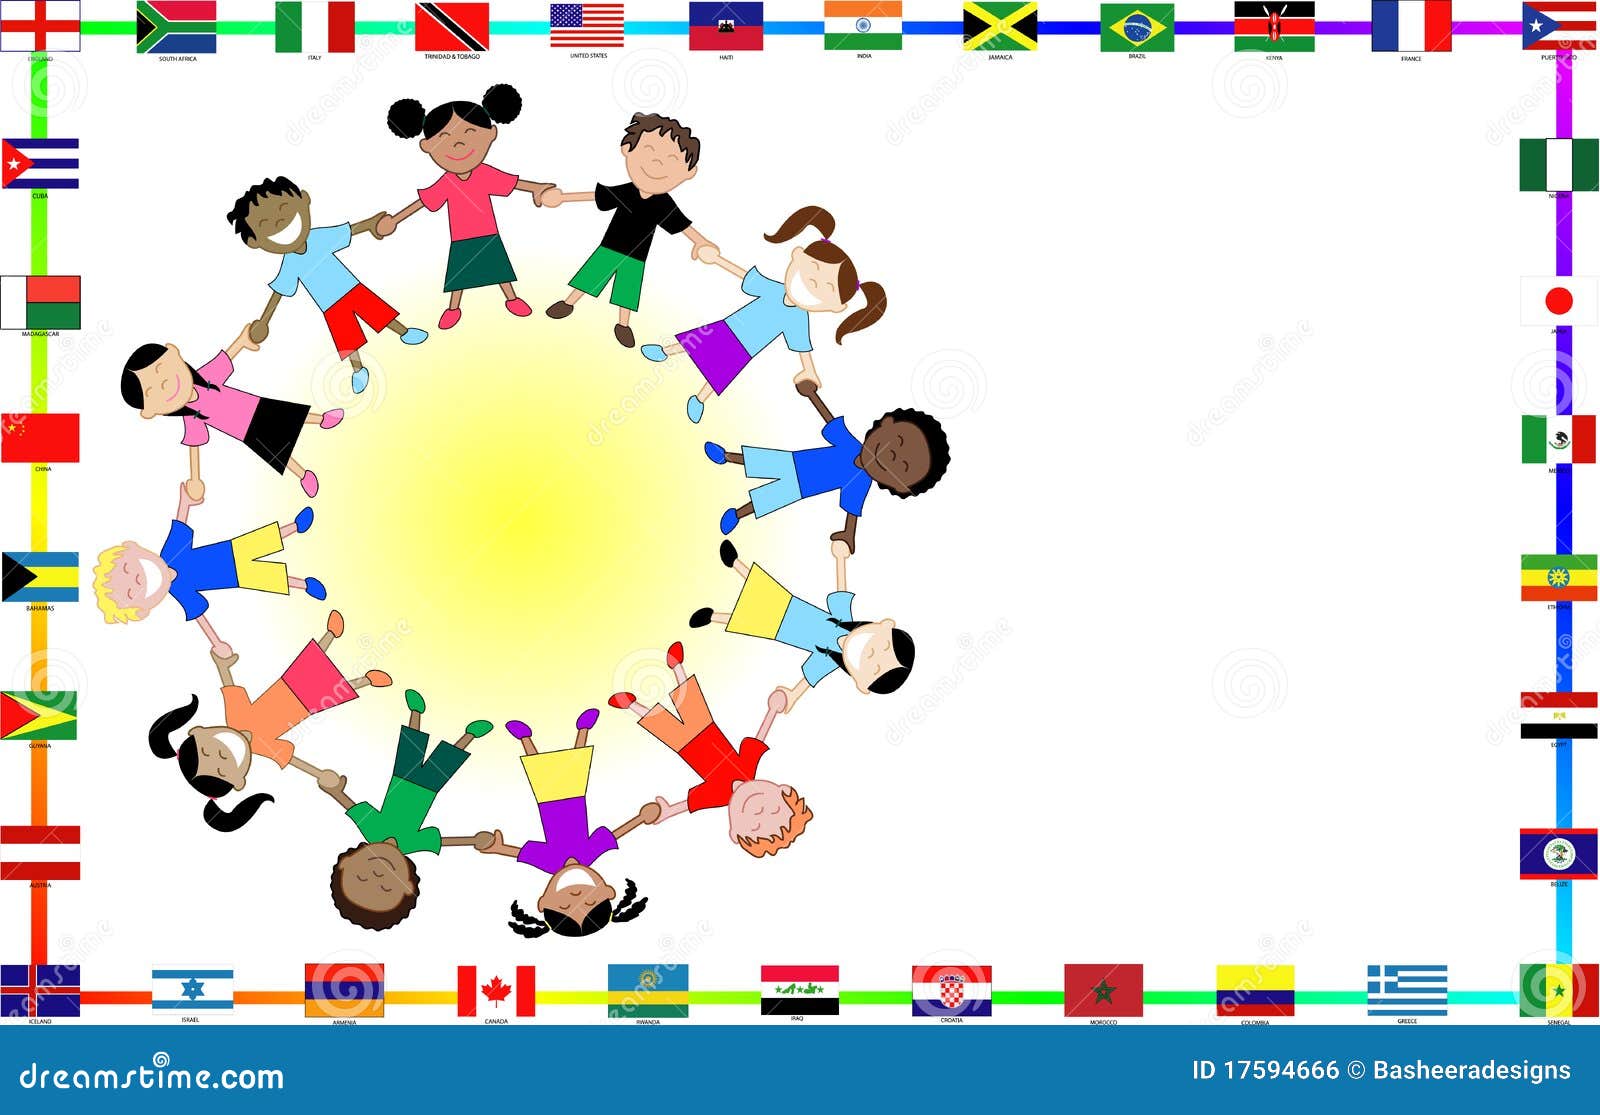 Cultural Kids With Flags Royalty Free Stock Image - Image: 175946661300 x 923